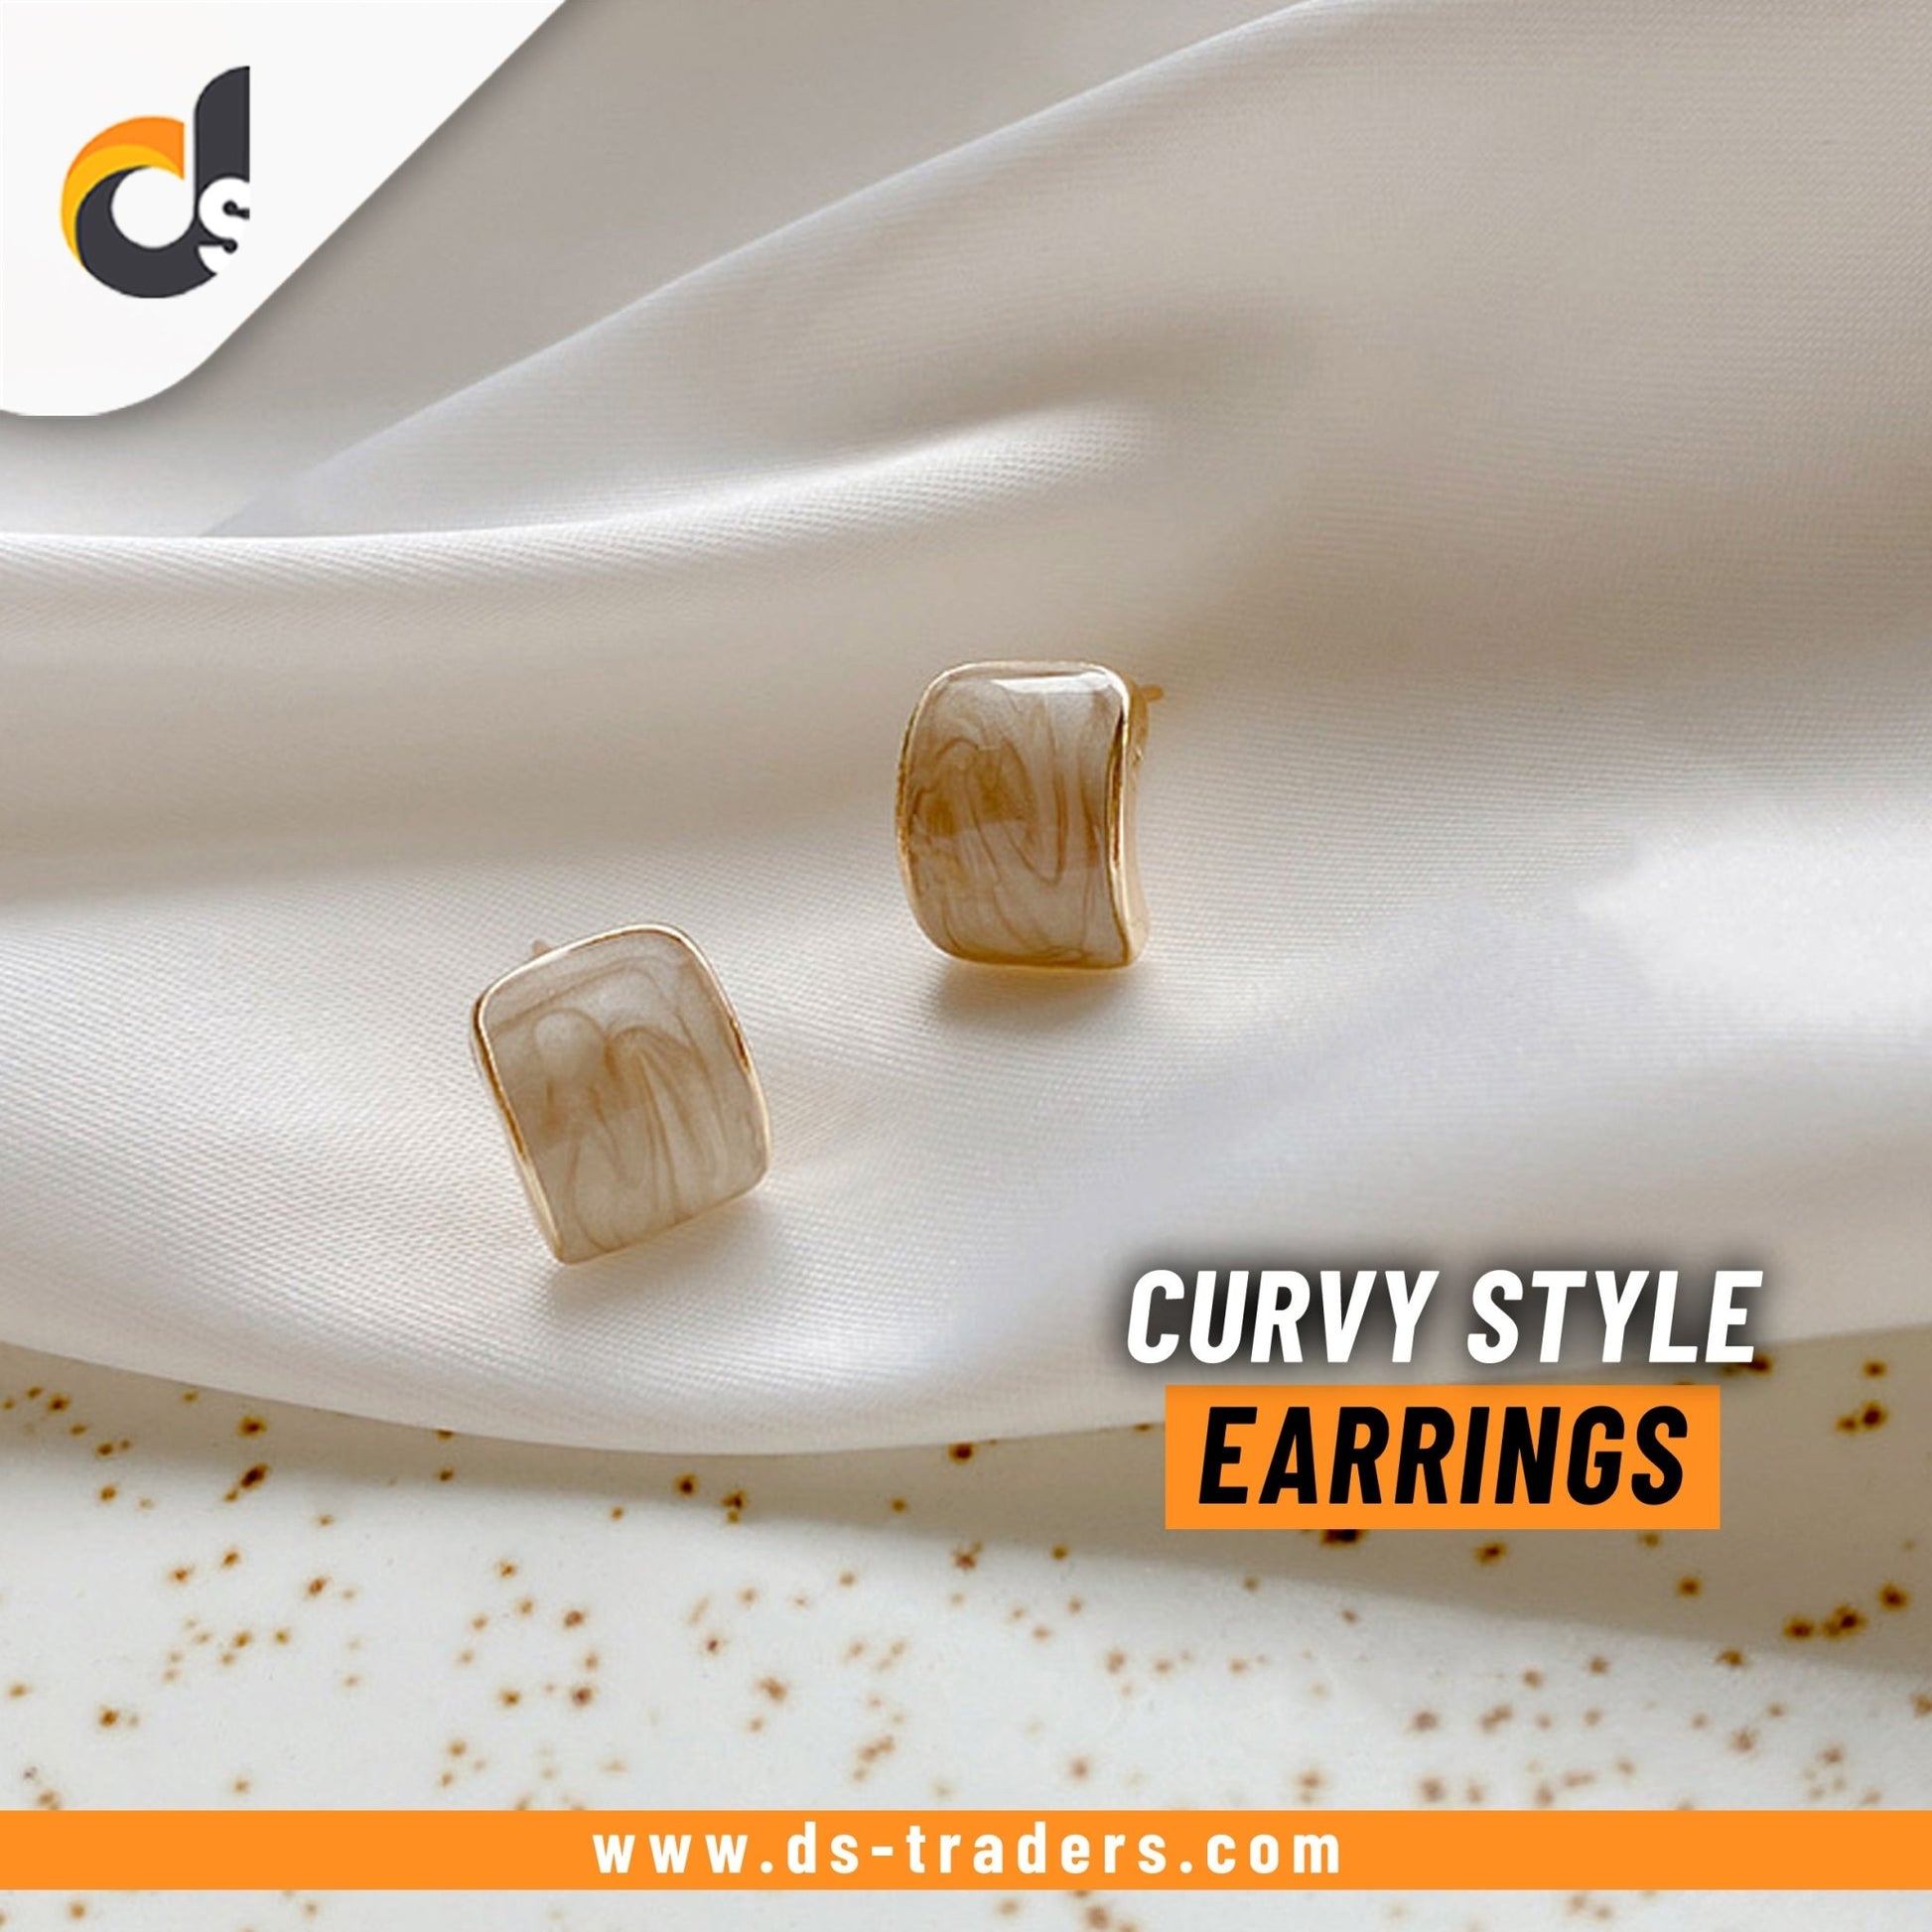 Curvy Style Earrings - DS Traders